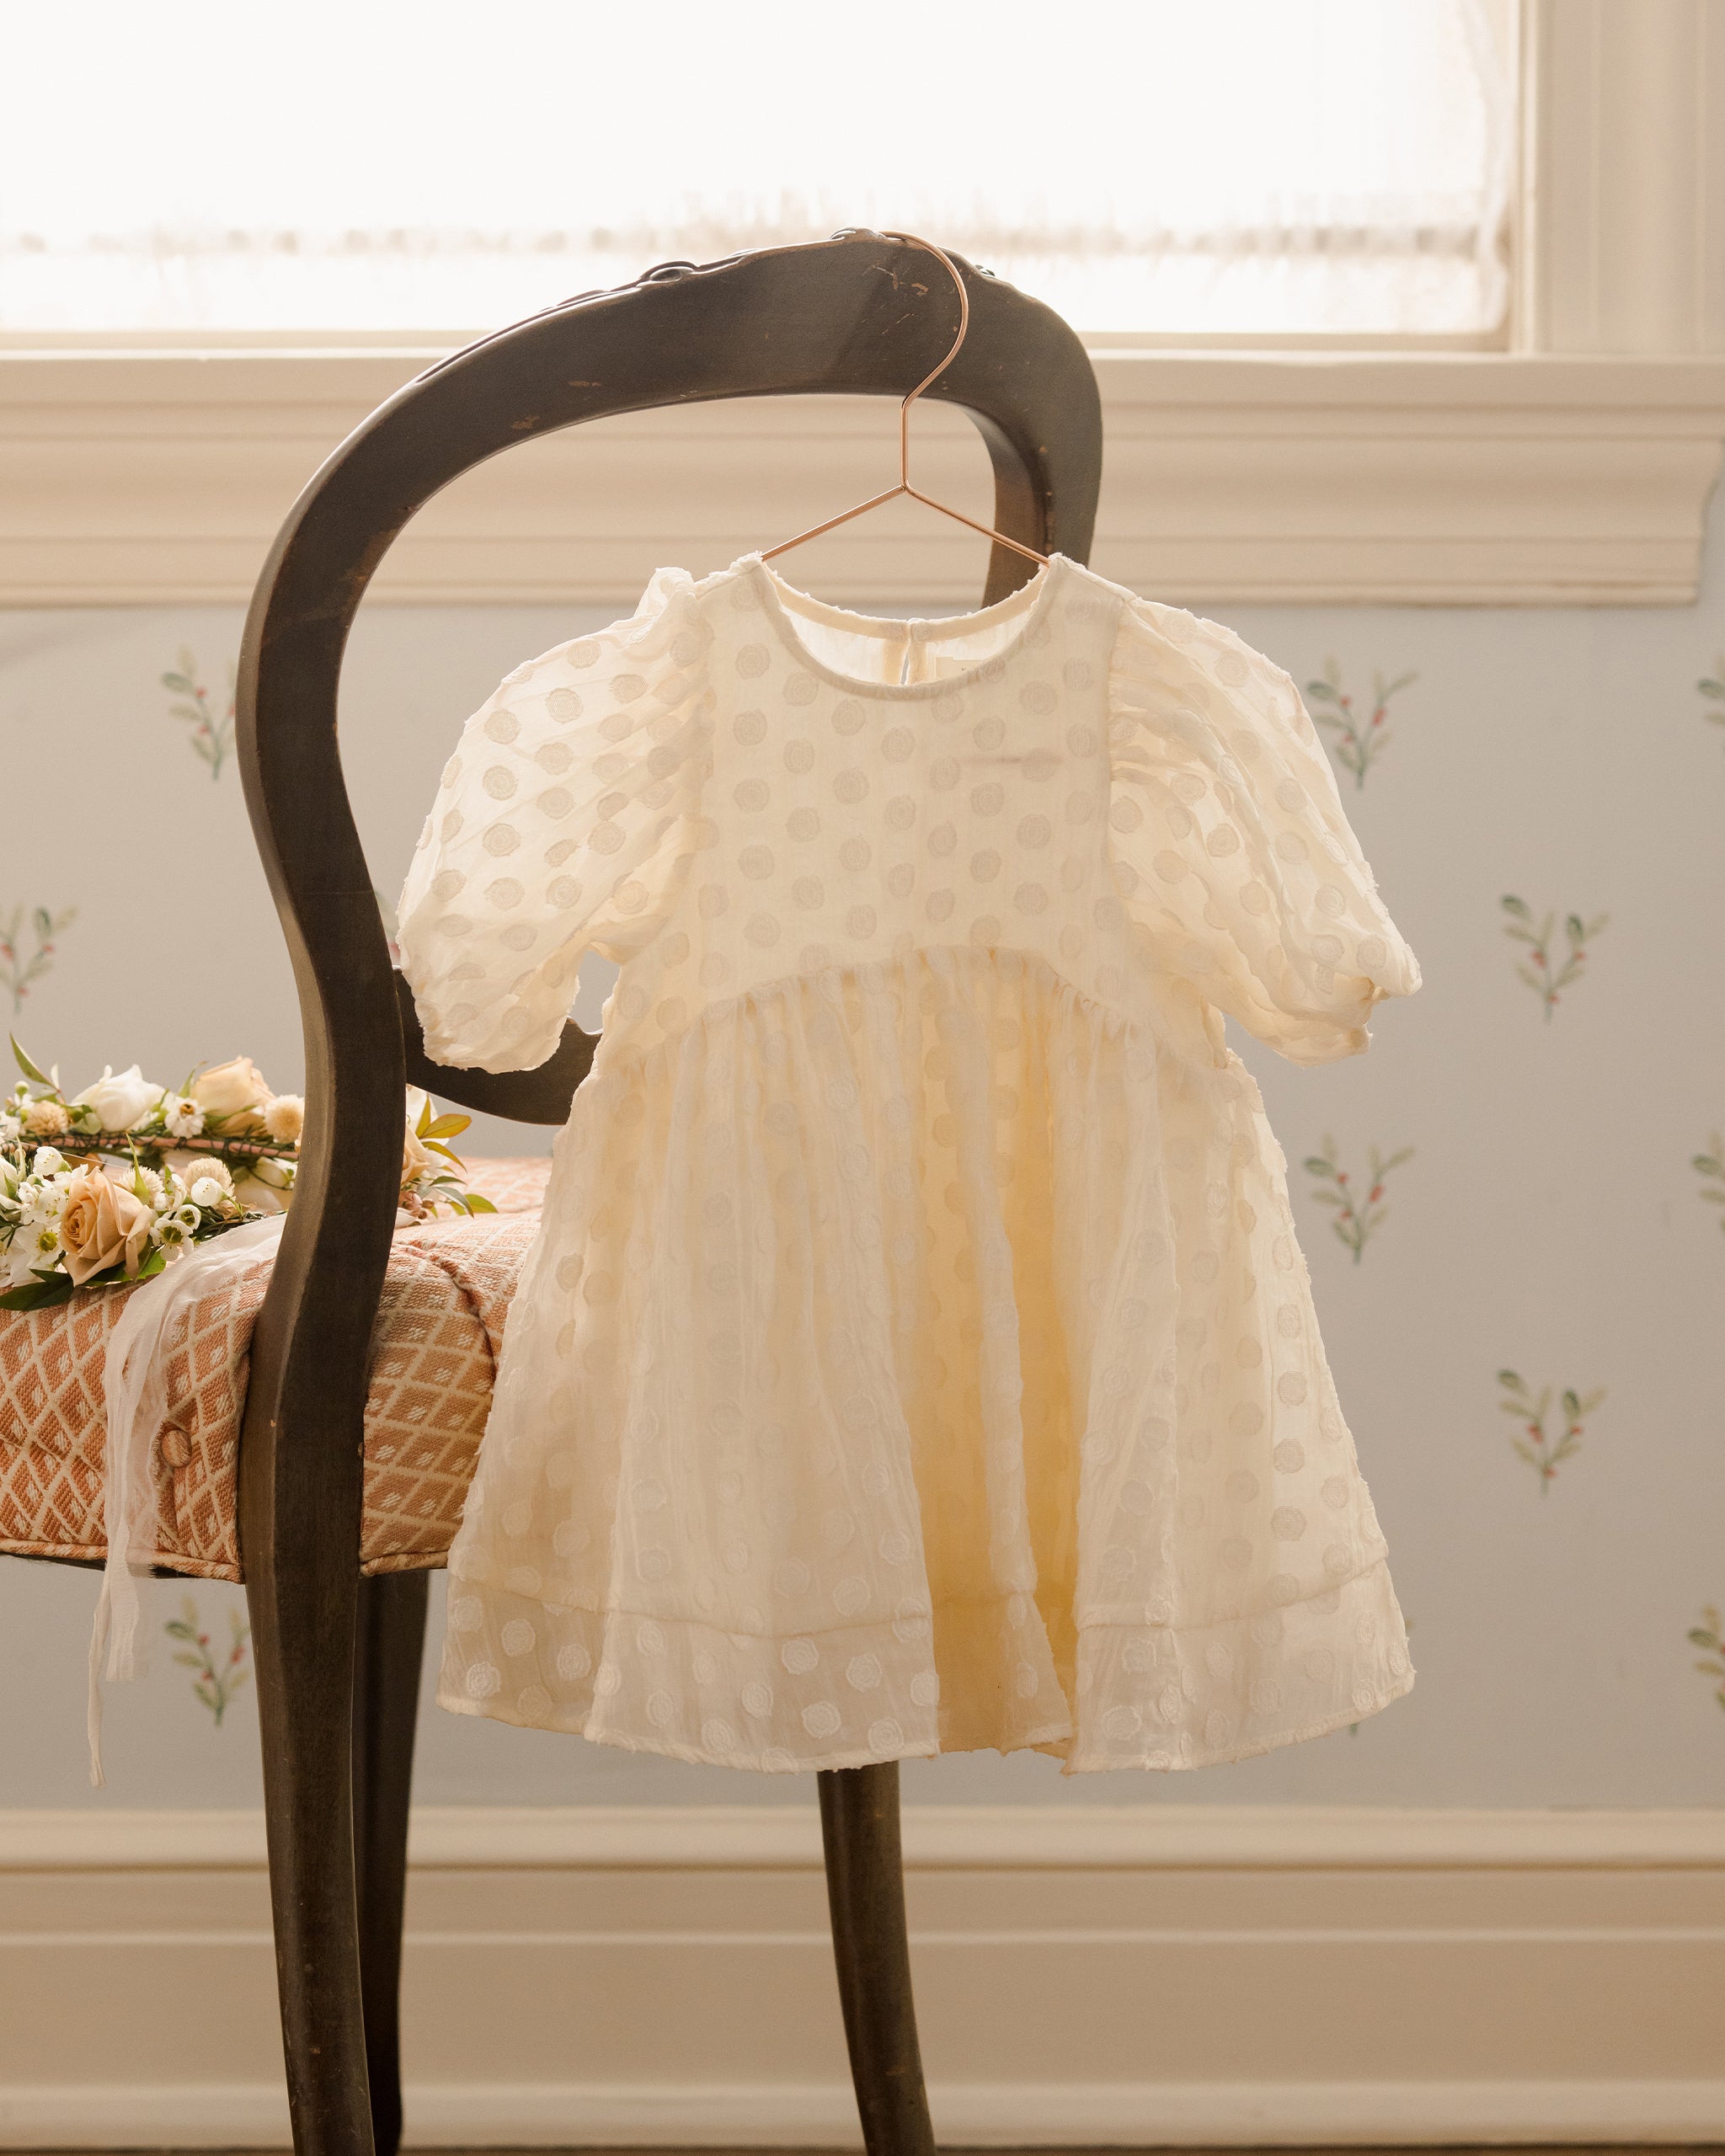 Luna Dress || Dotty - Rylee + Cru | Kids Clothes | Trendy Baby Clothes | Modern Infant Outfits |